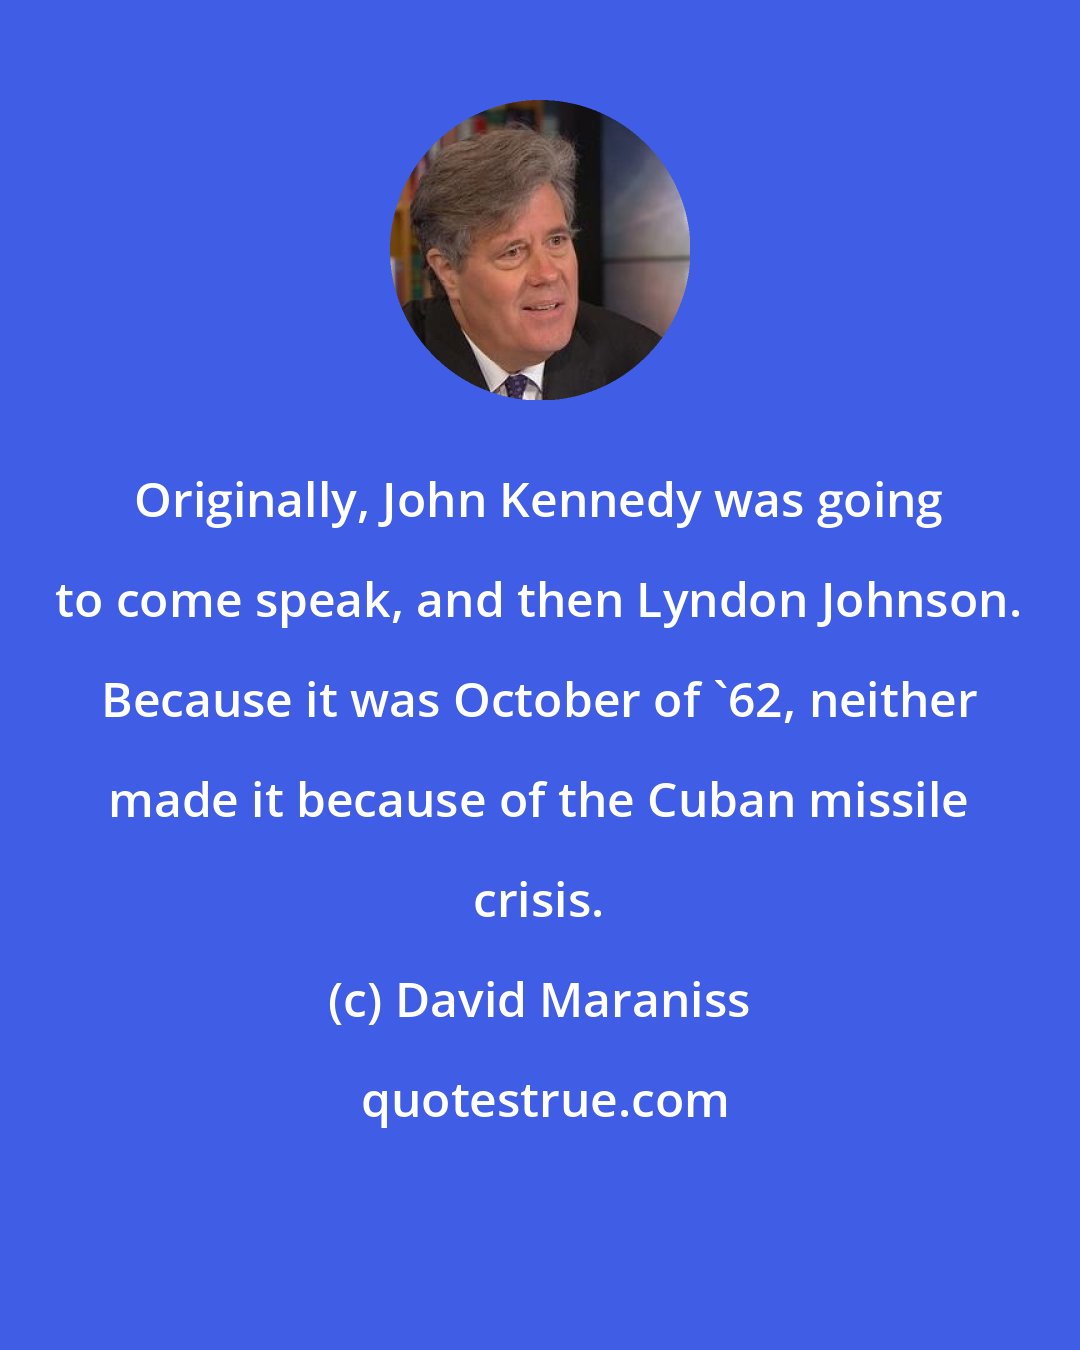 David Maraniss: Originally, John Kennedy was going to come speak, and then Lyndon Johnson. Because it was October of '62, neither made it because of the Cuban missile crisis.